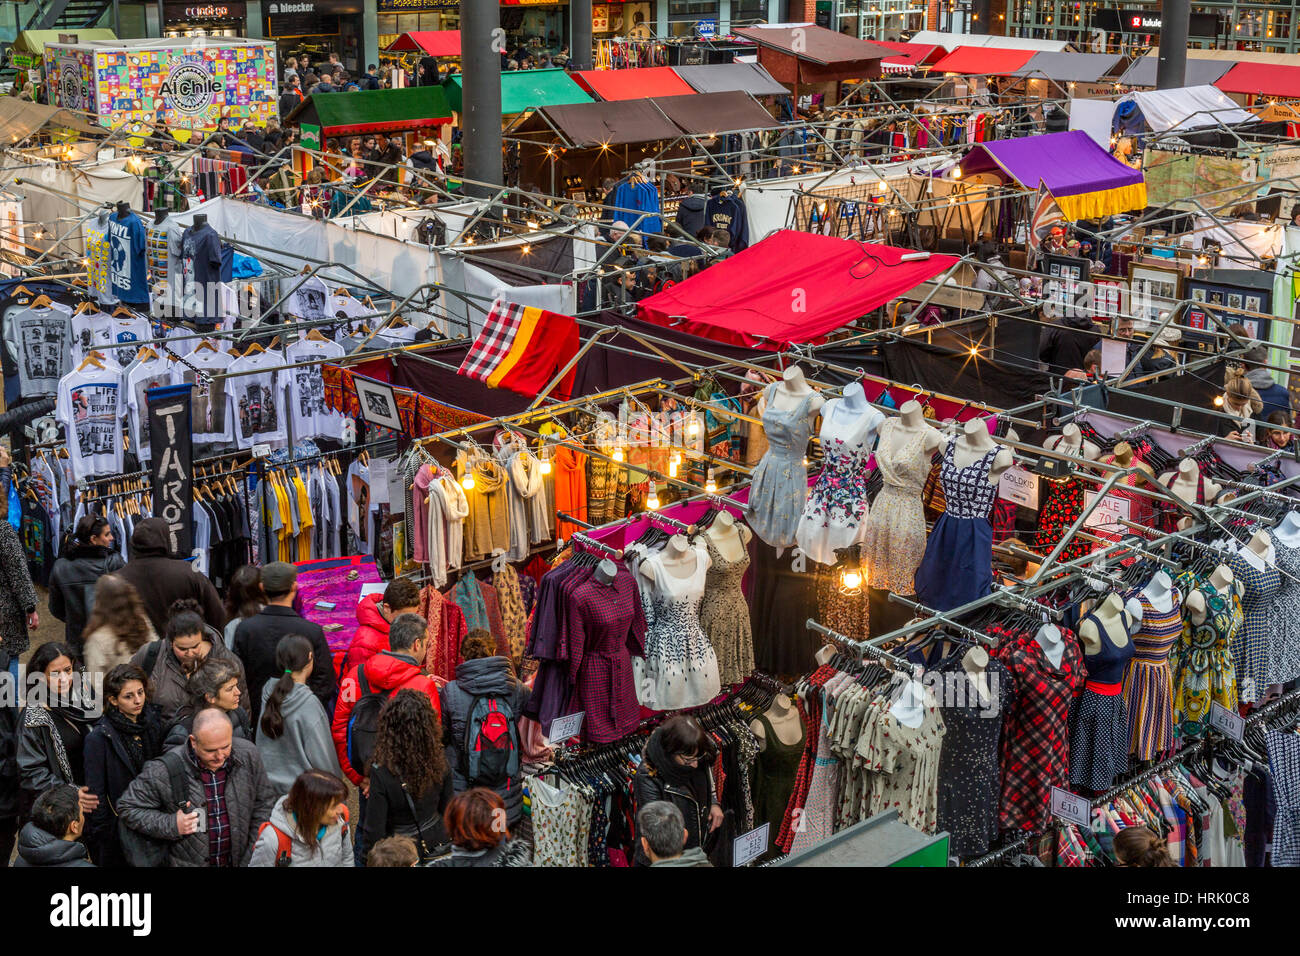 Old Spitalfields Market in East London, on a popular Sunday morning is packed with artisans and traders offering all kinds of merchandise, England UK Stock Photo